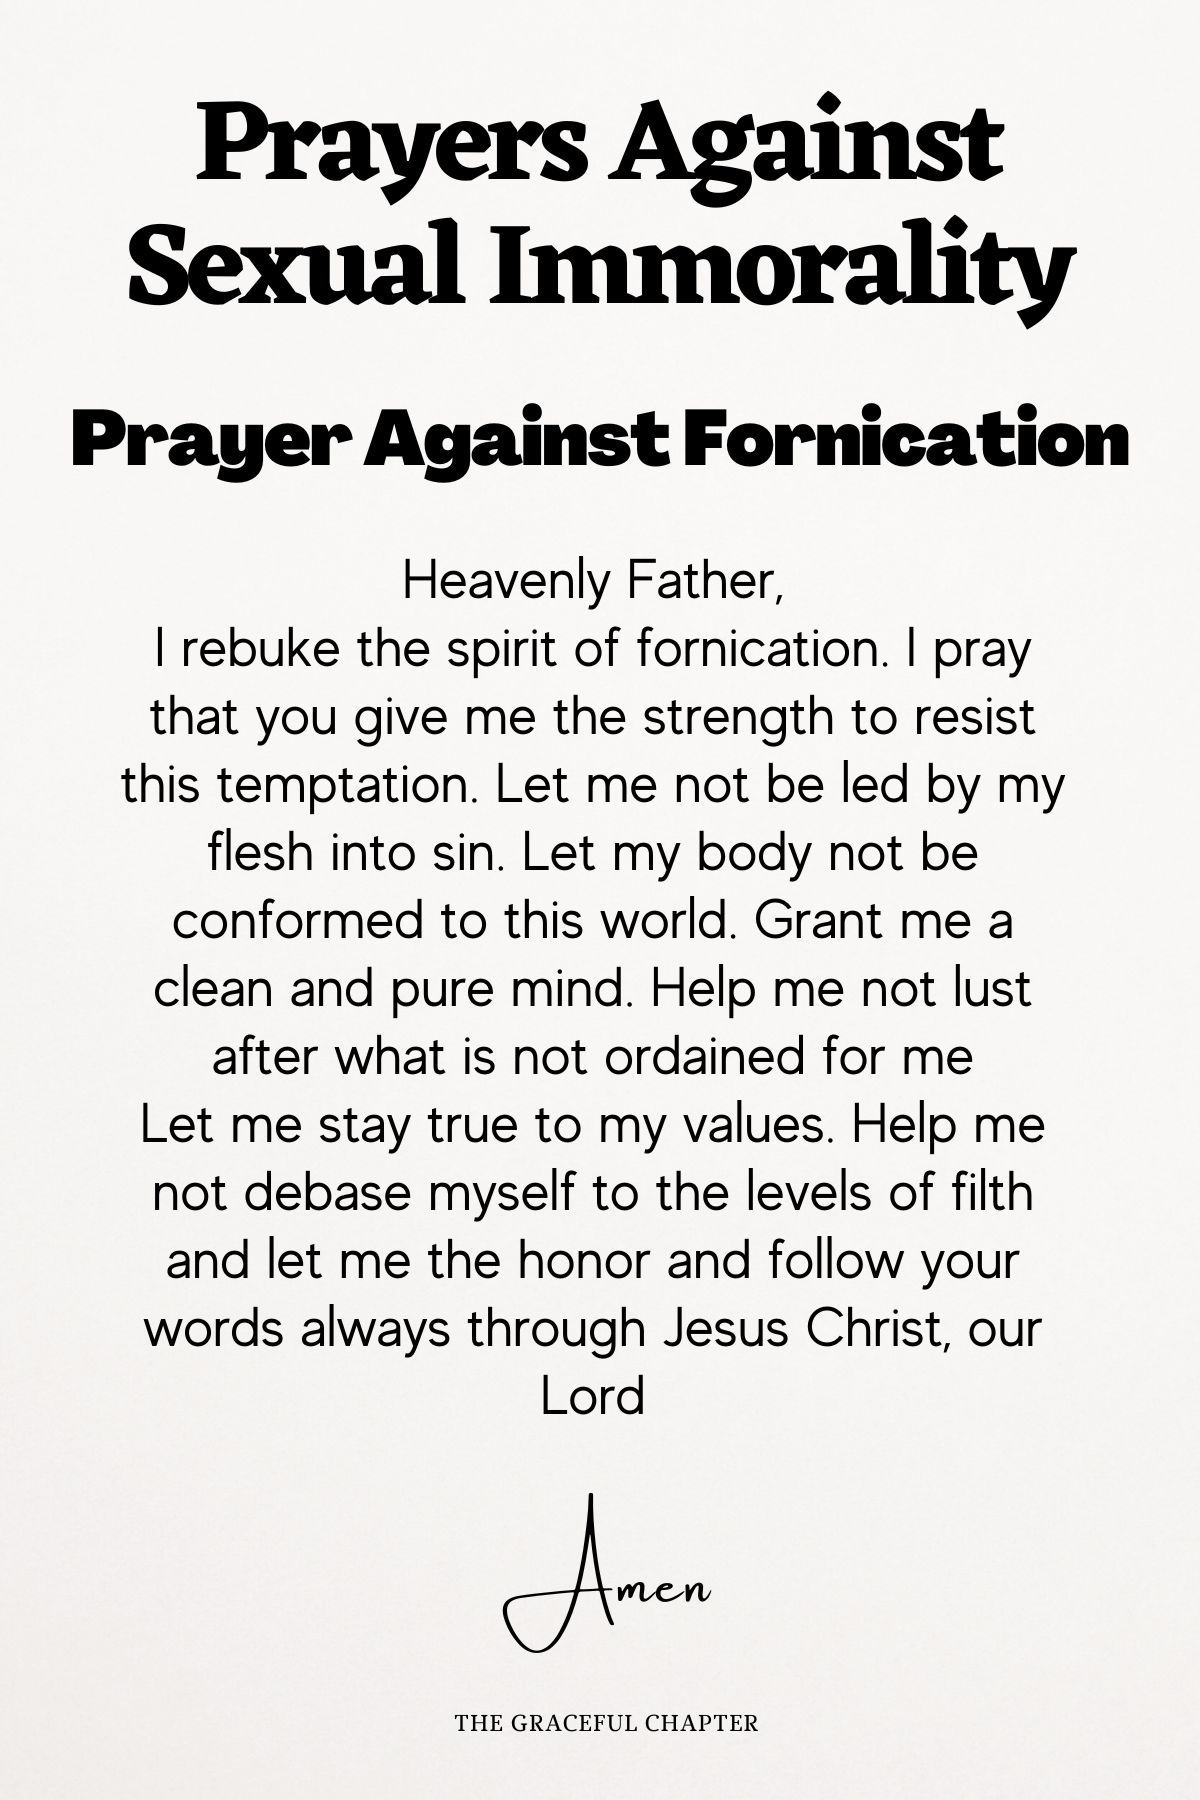 Prayer against fornicationb- 10 Effective Prayers Against Sexual Immorality